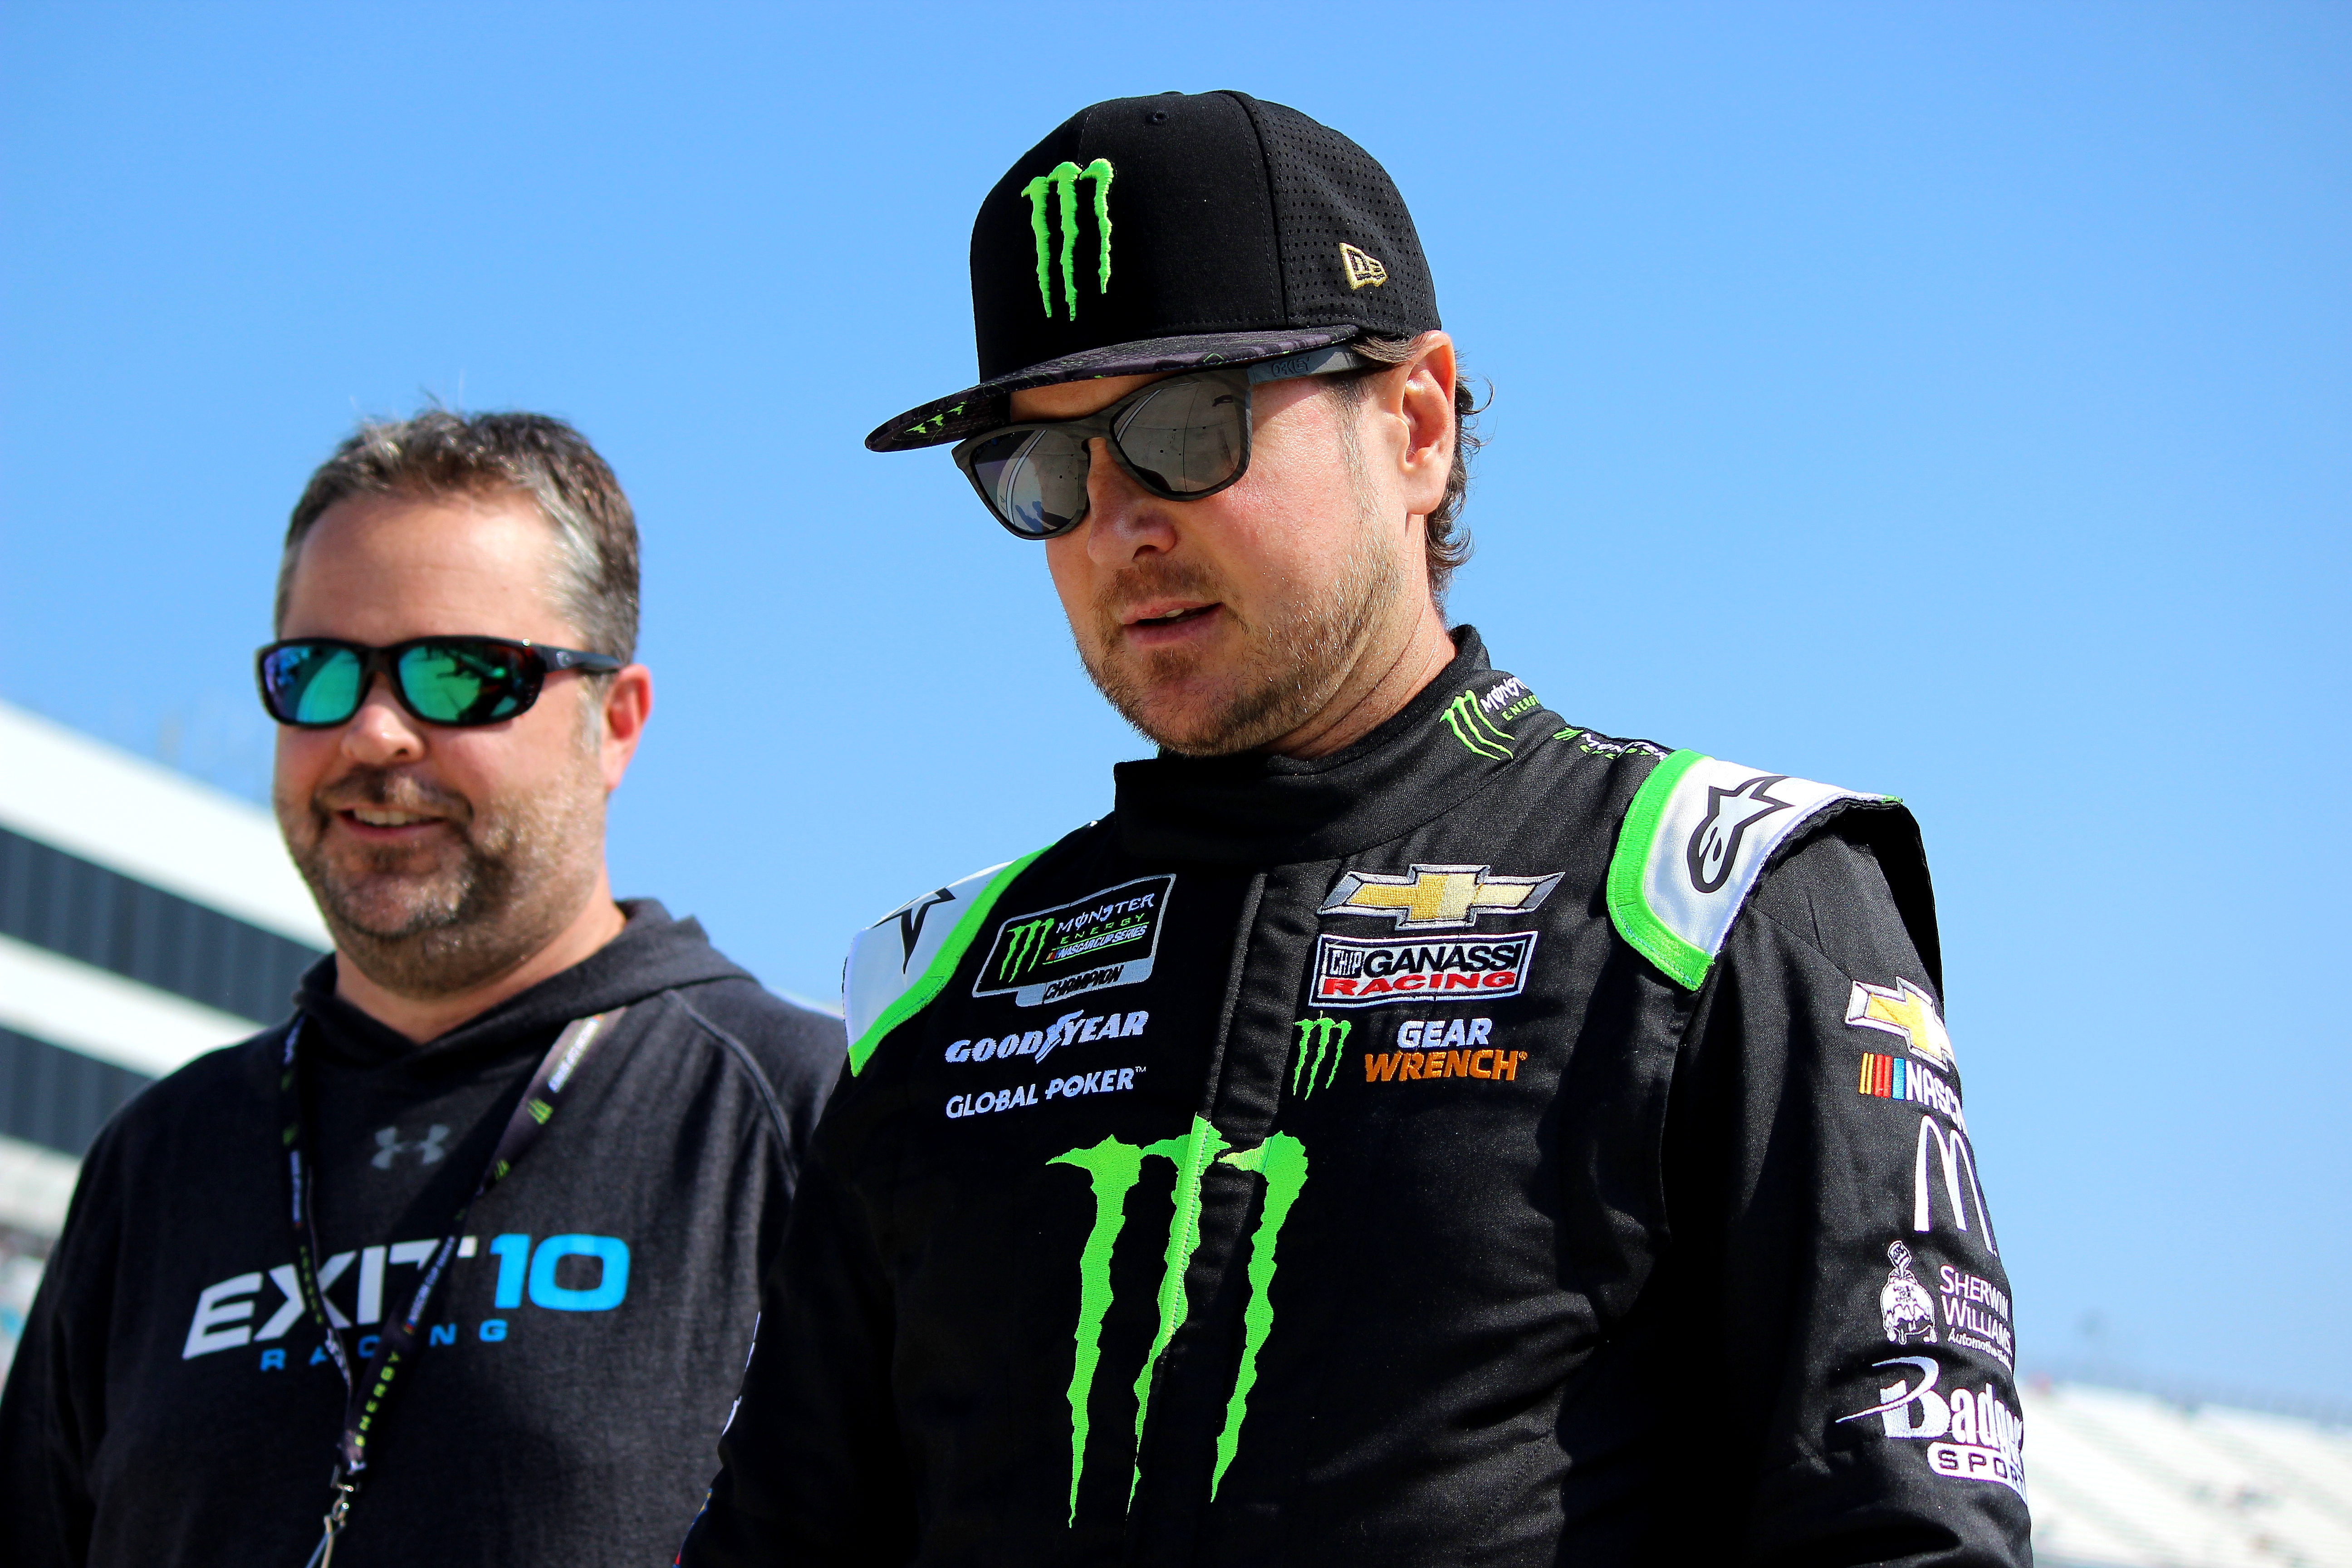 Overall, Kurt Busch was satisfied with his second place showing at Michigan. (Photo Credit: Josh Jones/TPF)